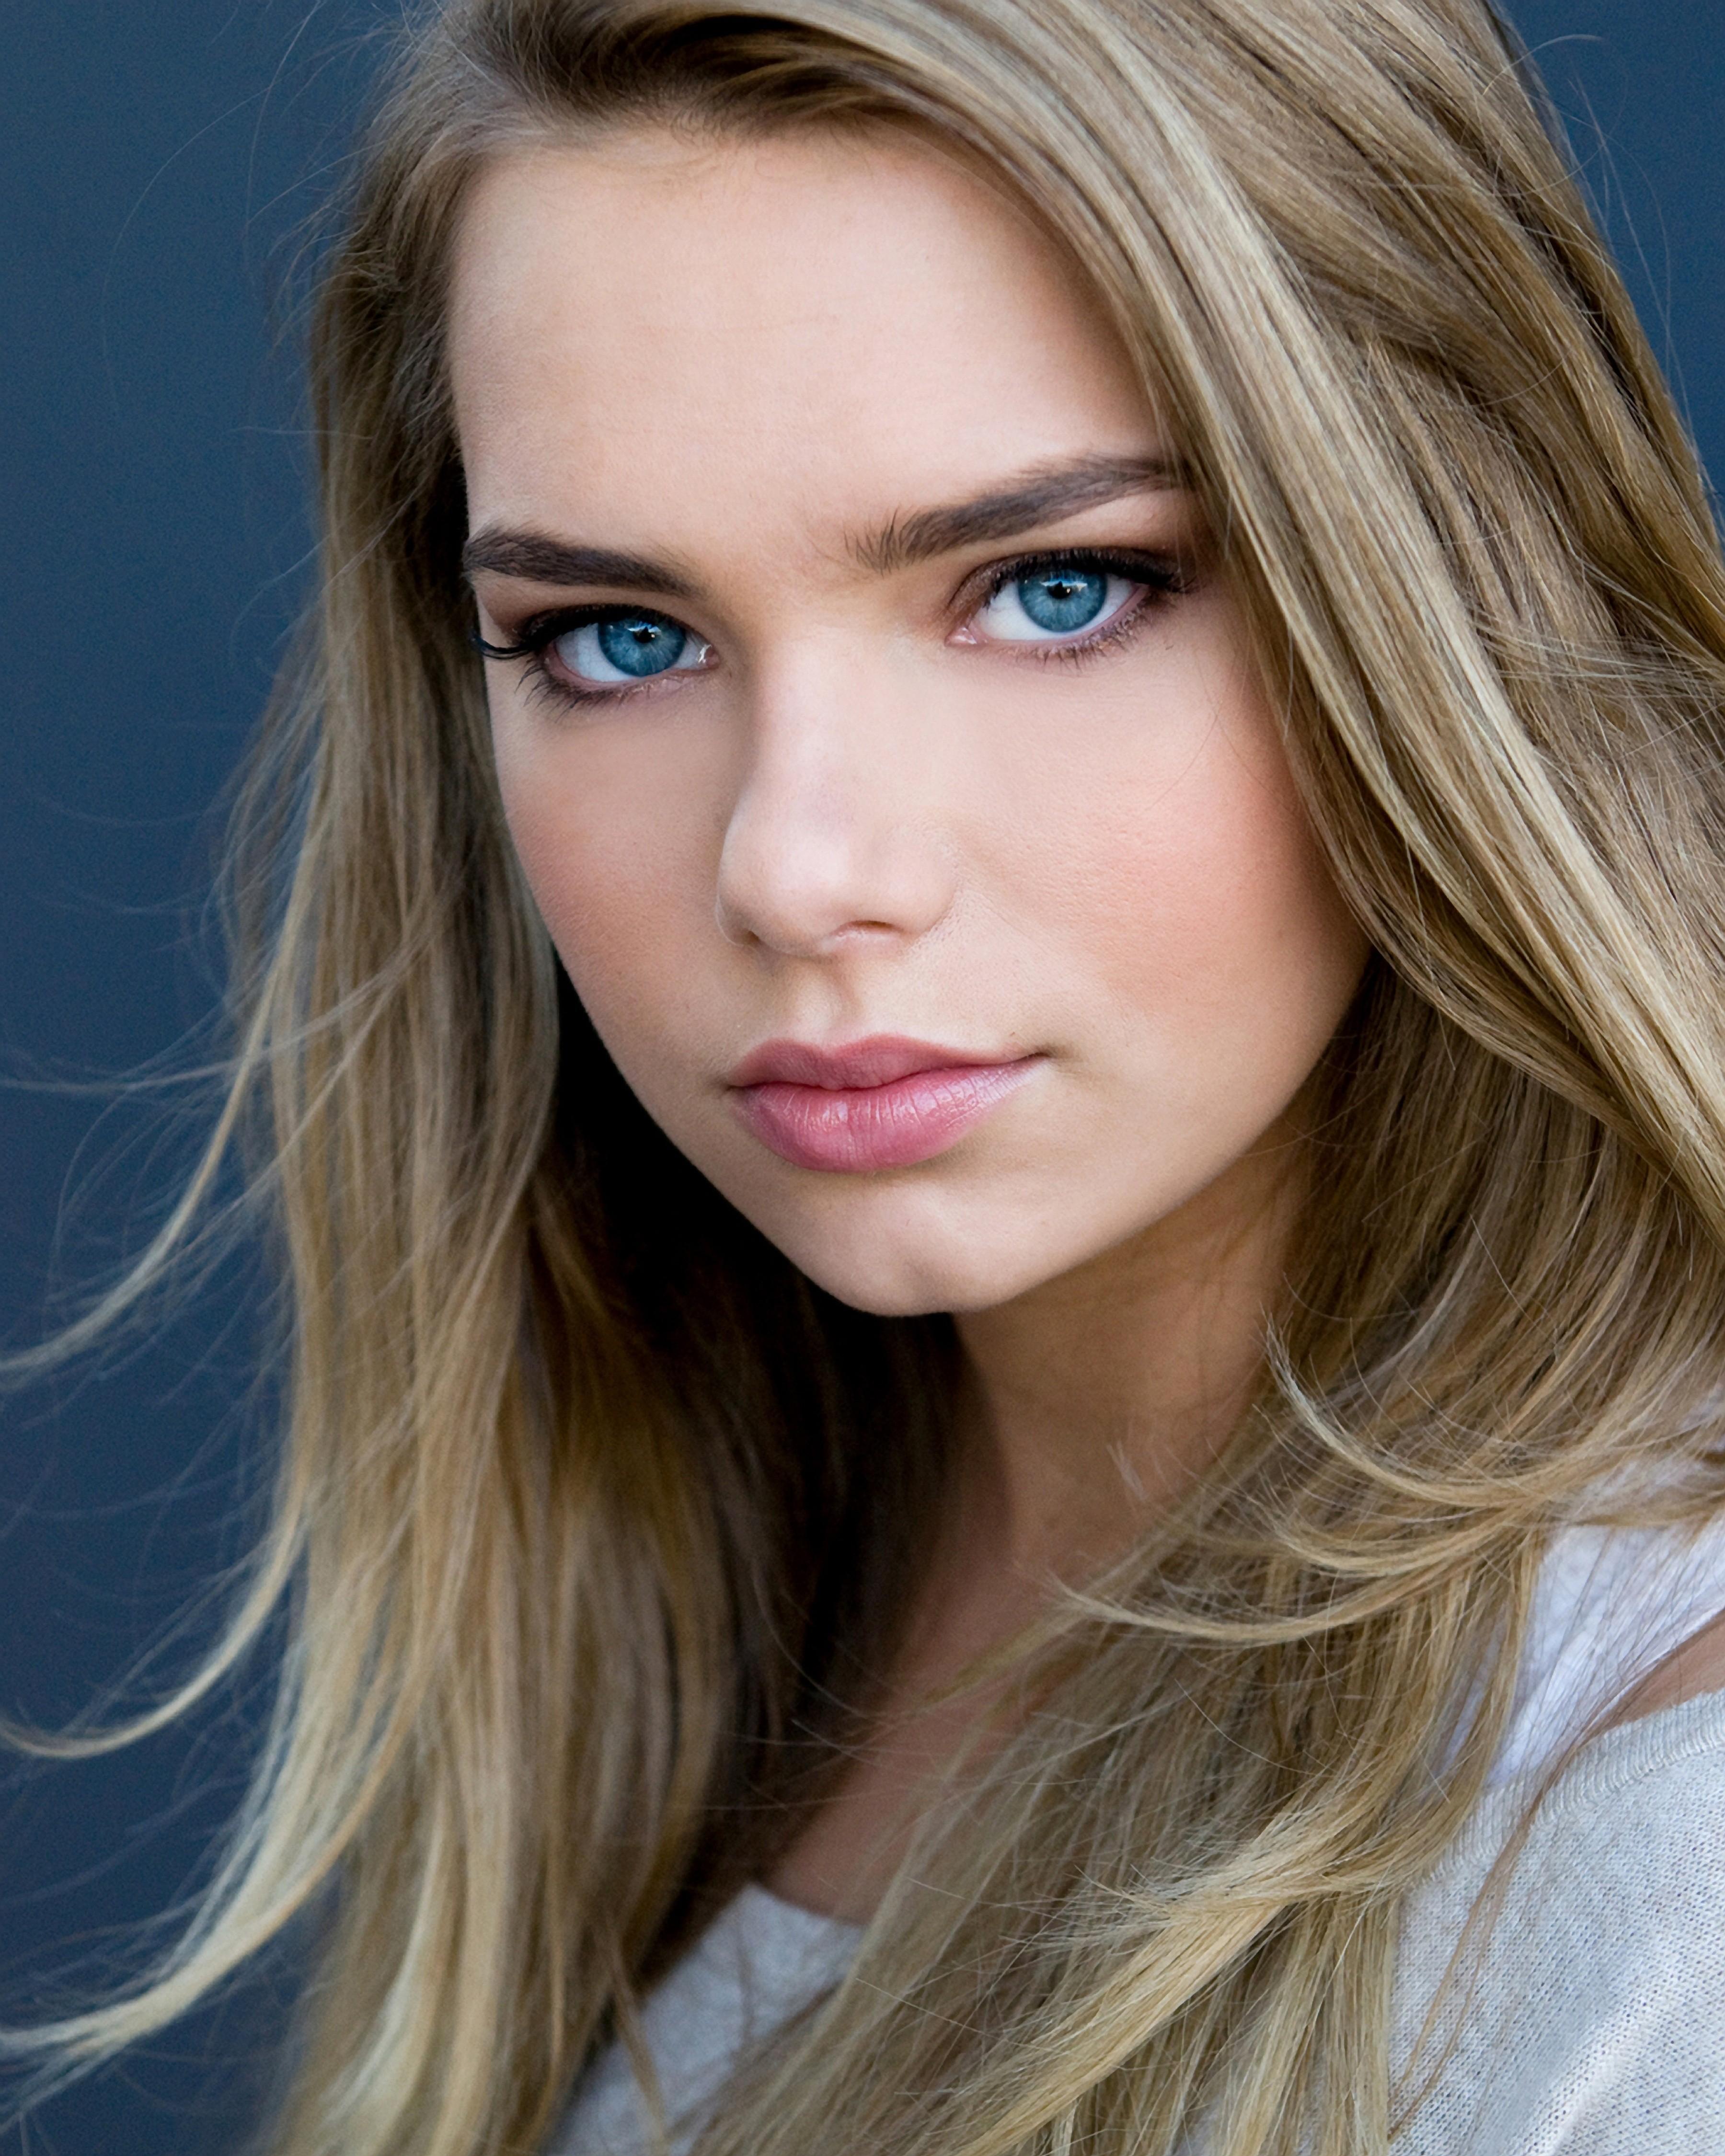 blondes, women, blue eyes, actresses, lips, young, Indiana Evans